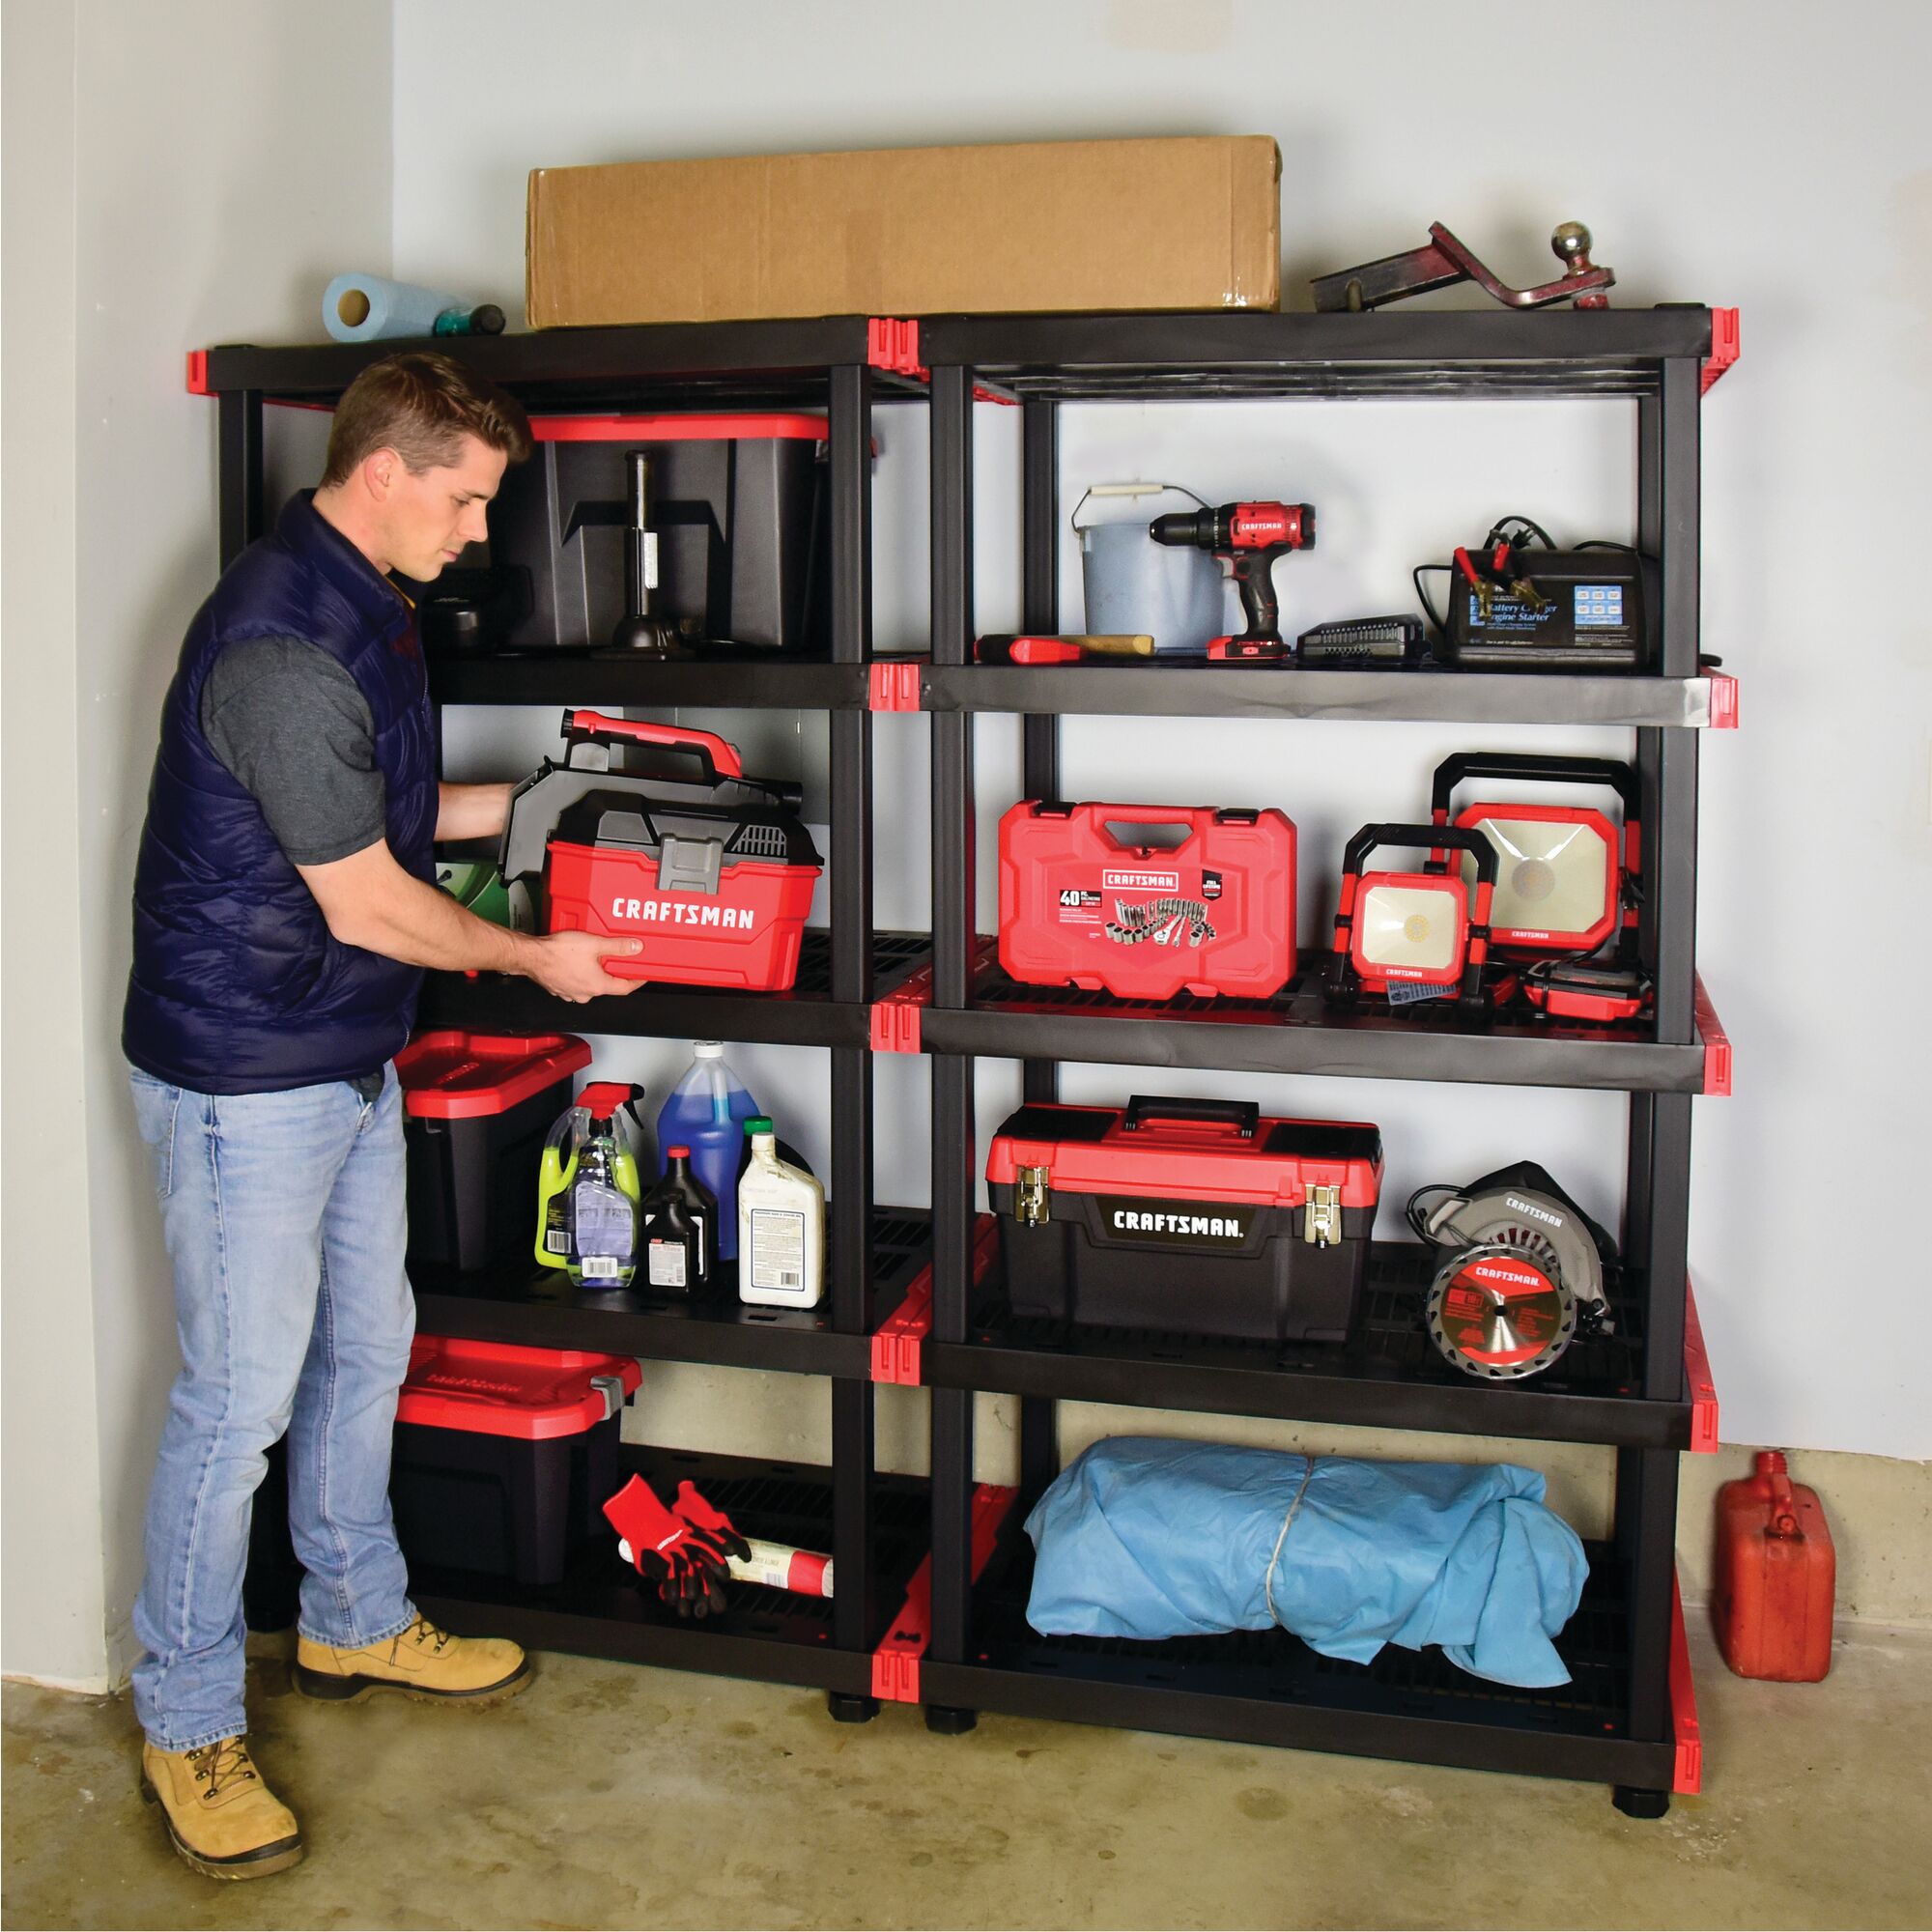 24 by 40 ventilated 5 tier shelf is a great place to store equipment for easy access.